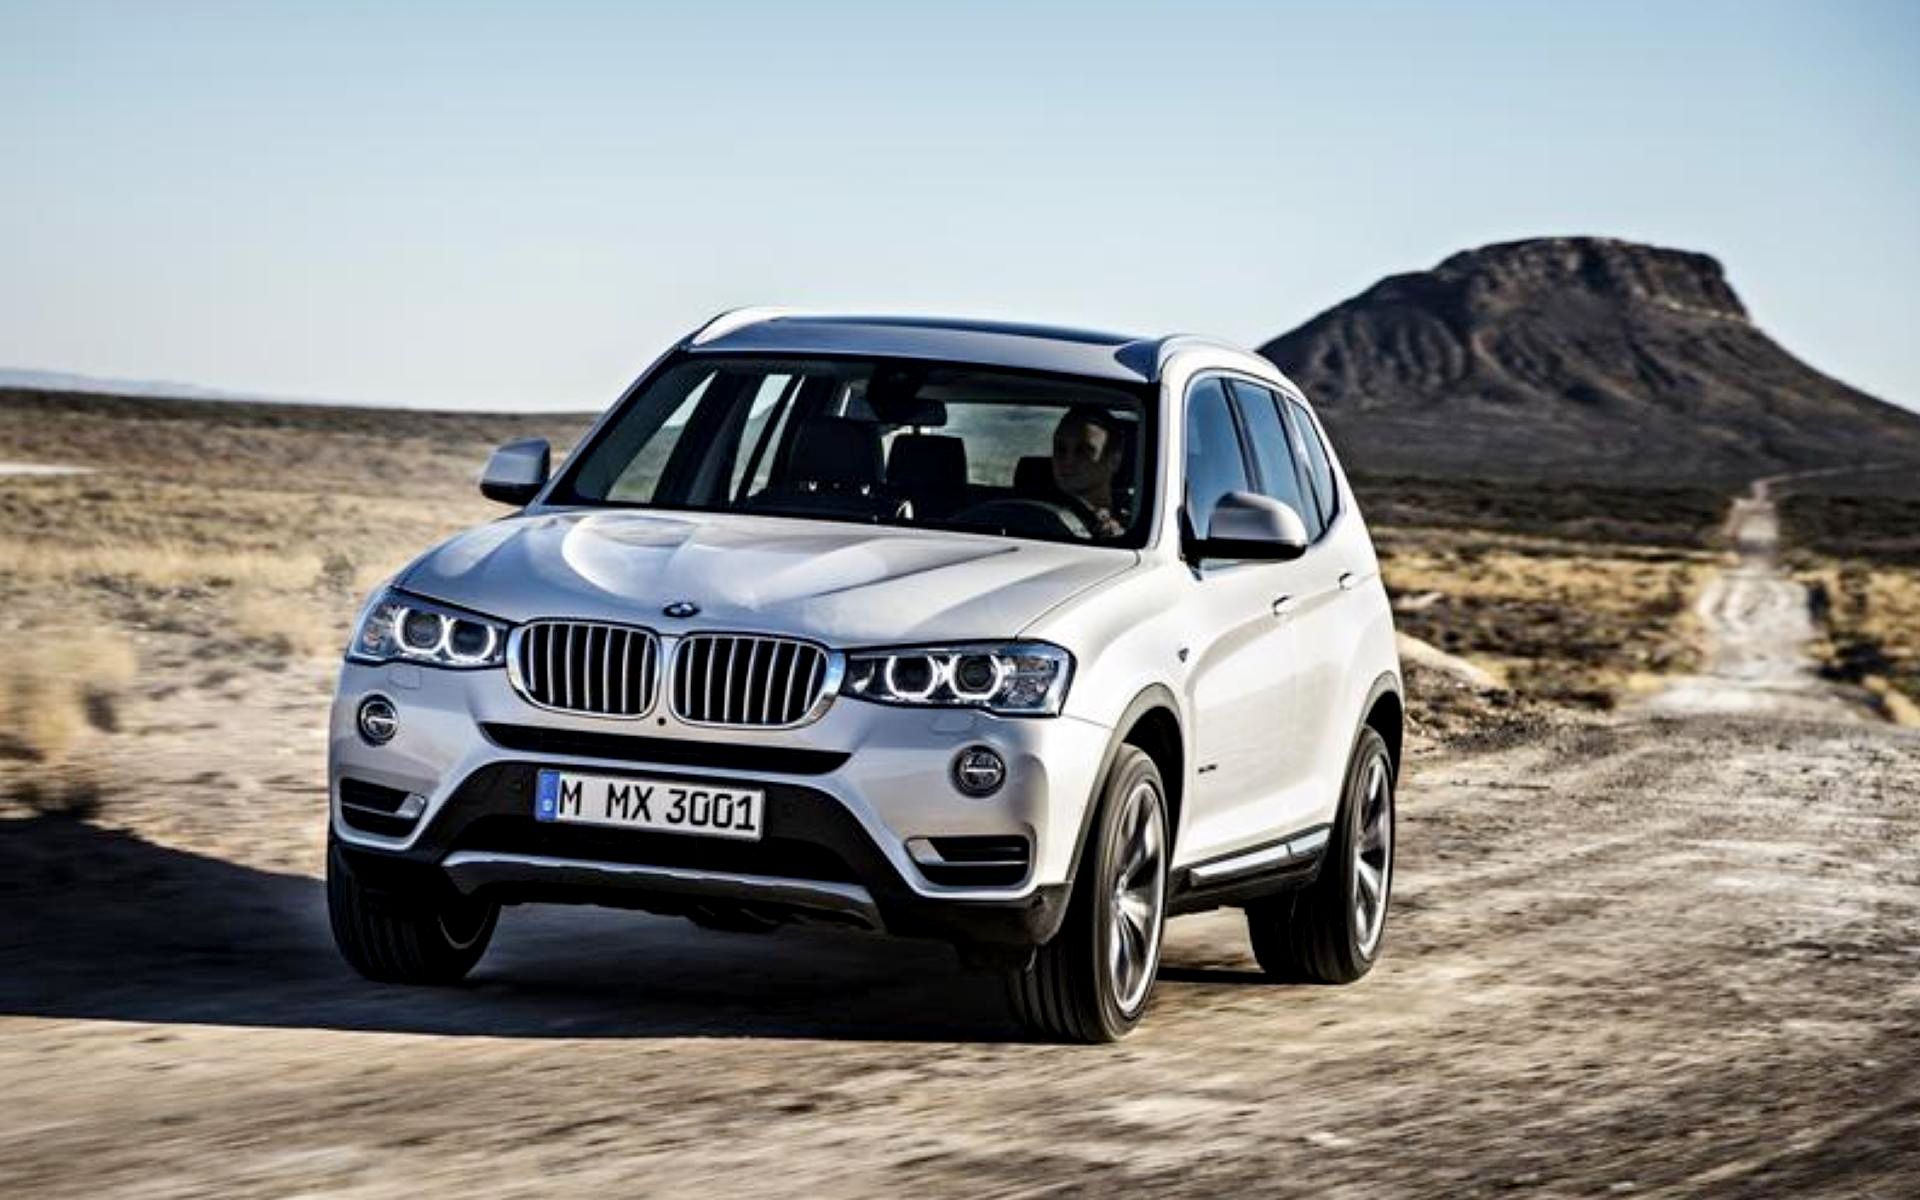 2015 BMW X3 driving off-road